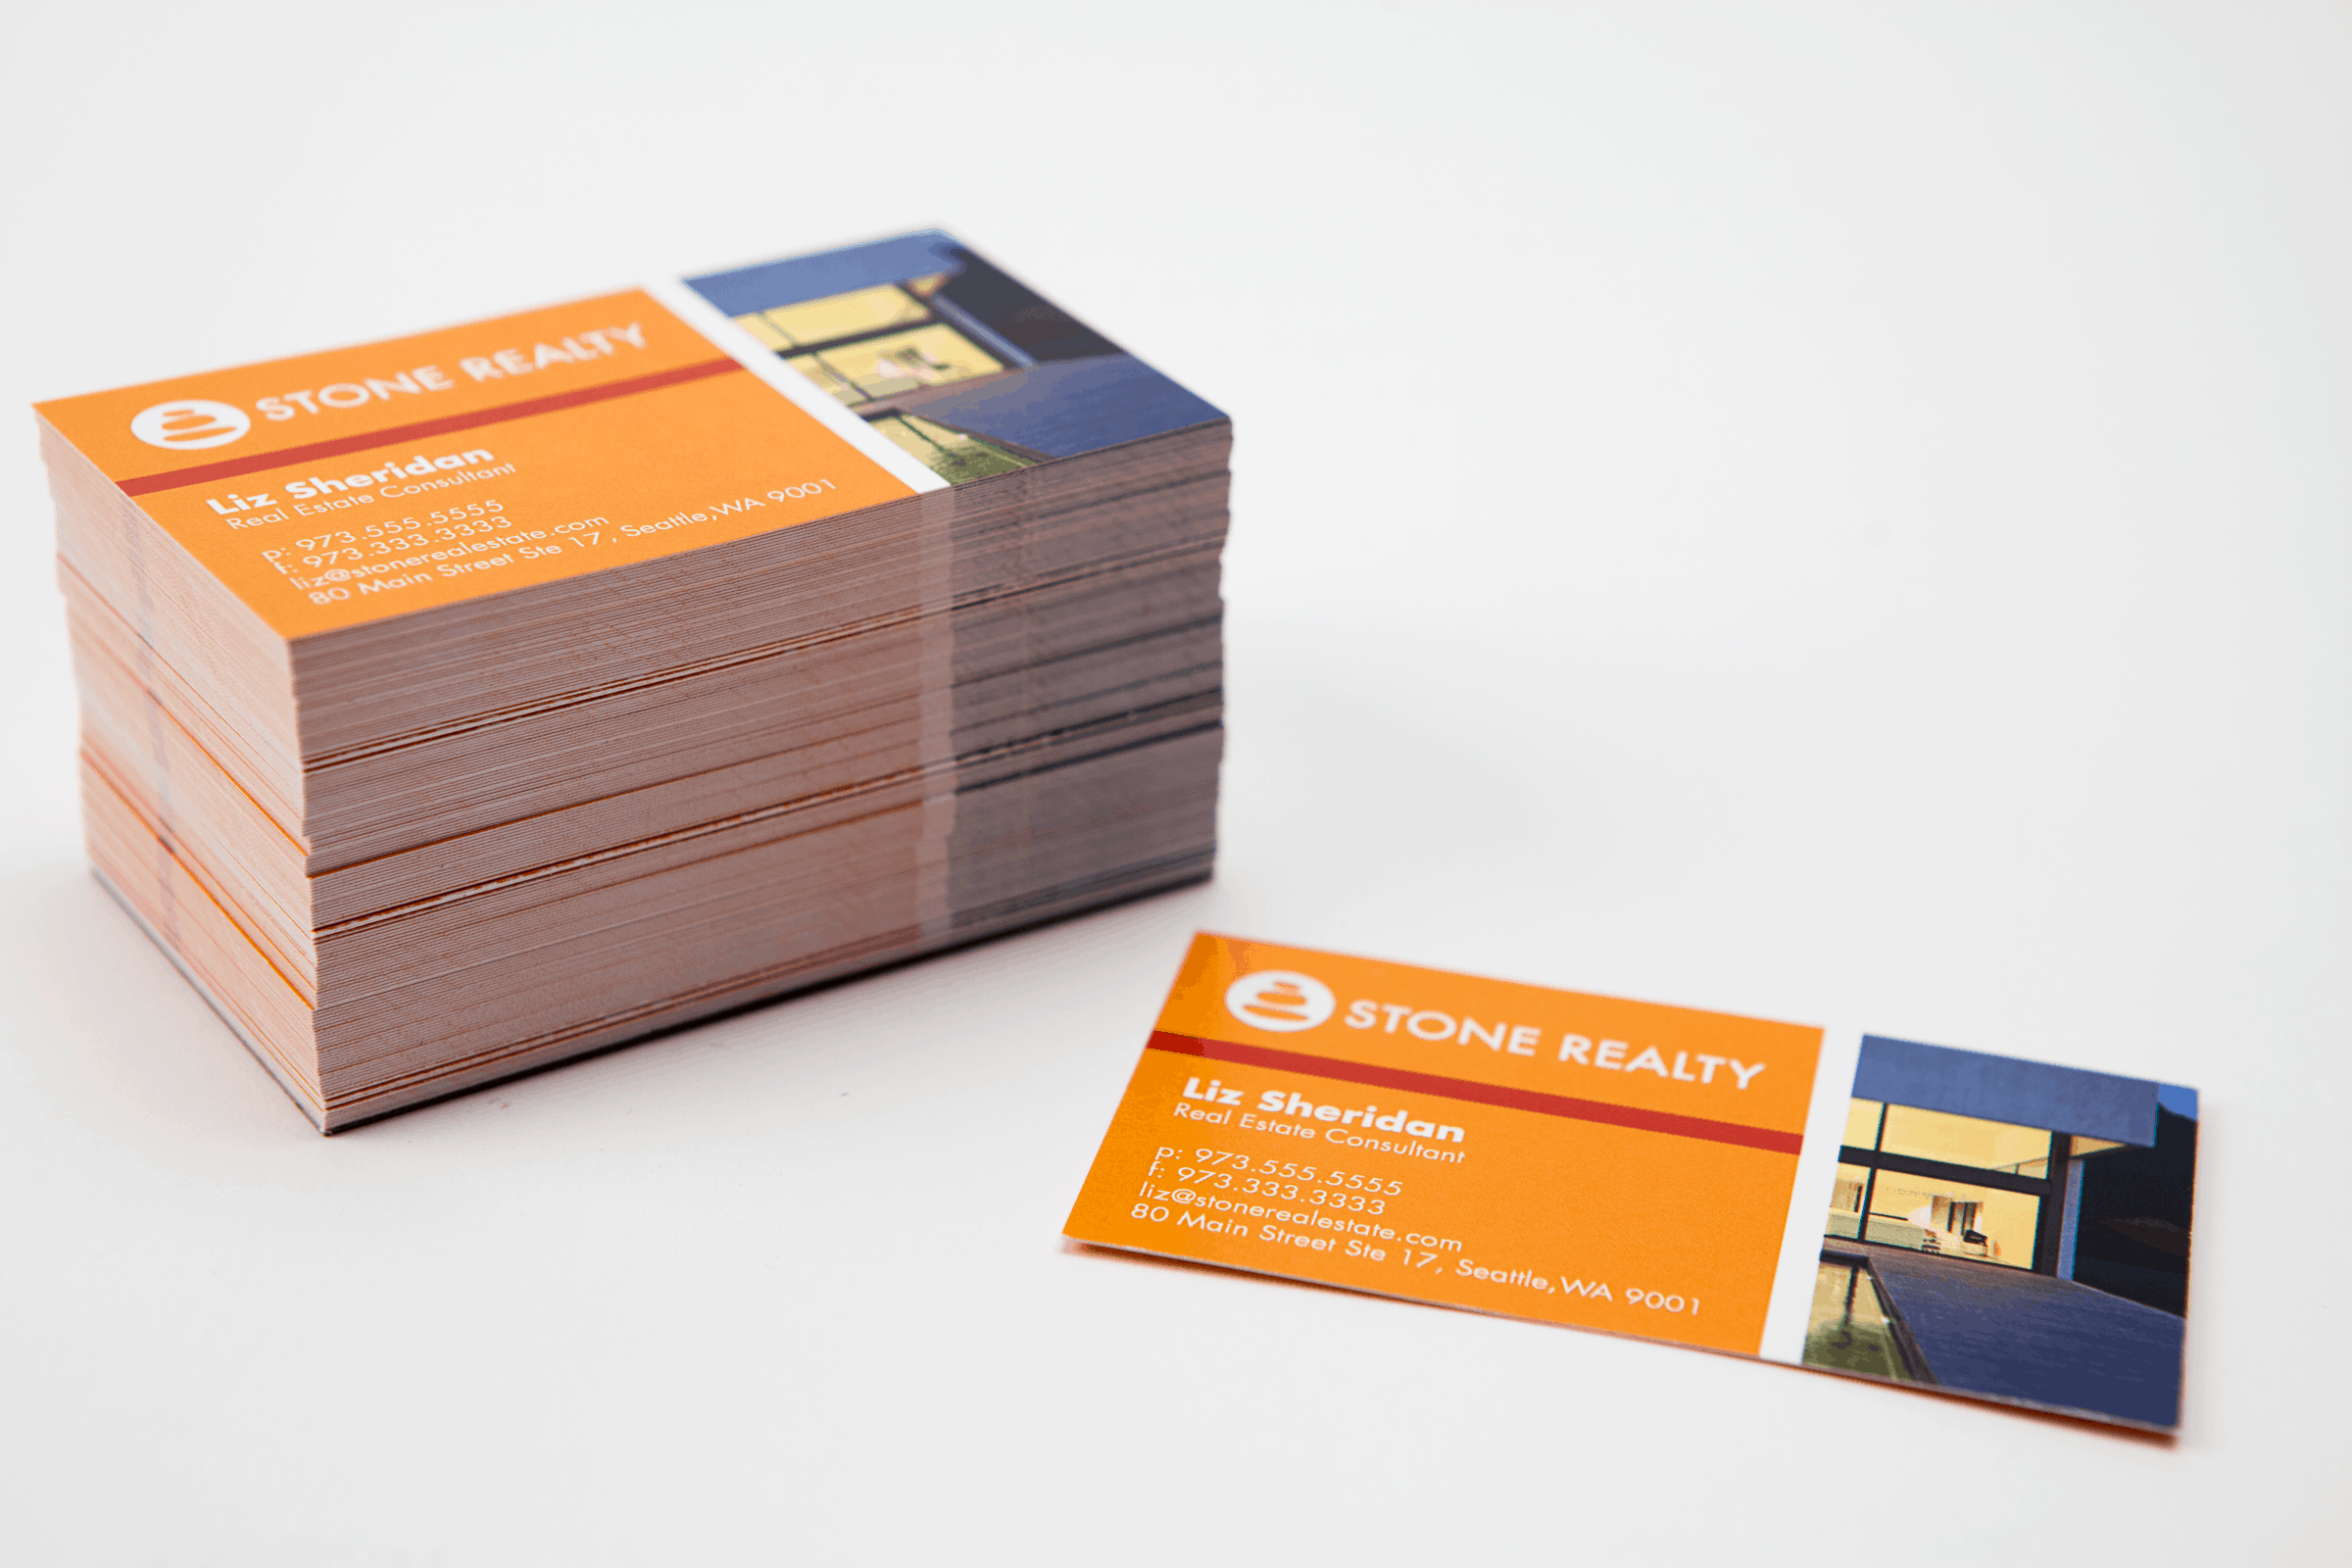 Best Paper for Business Cards: Weight & Stock Types